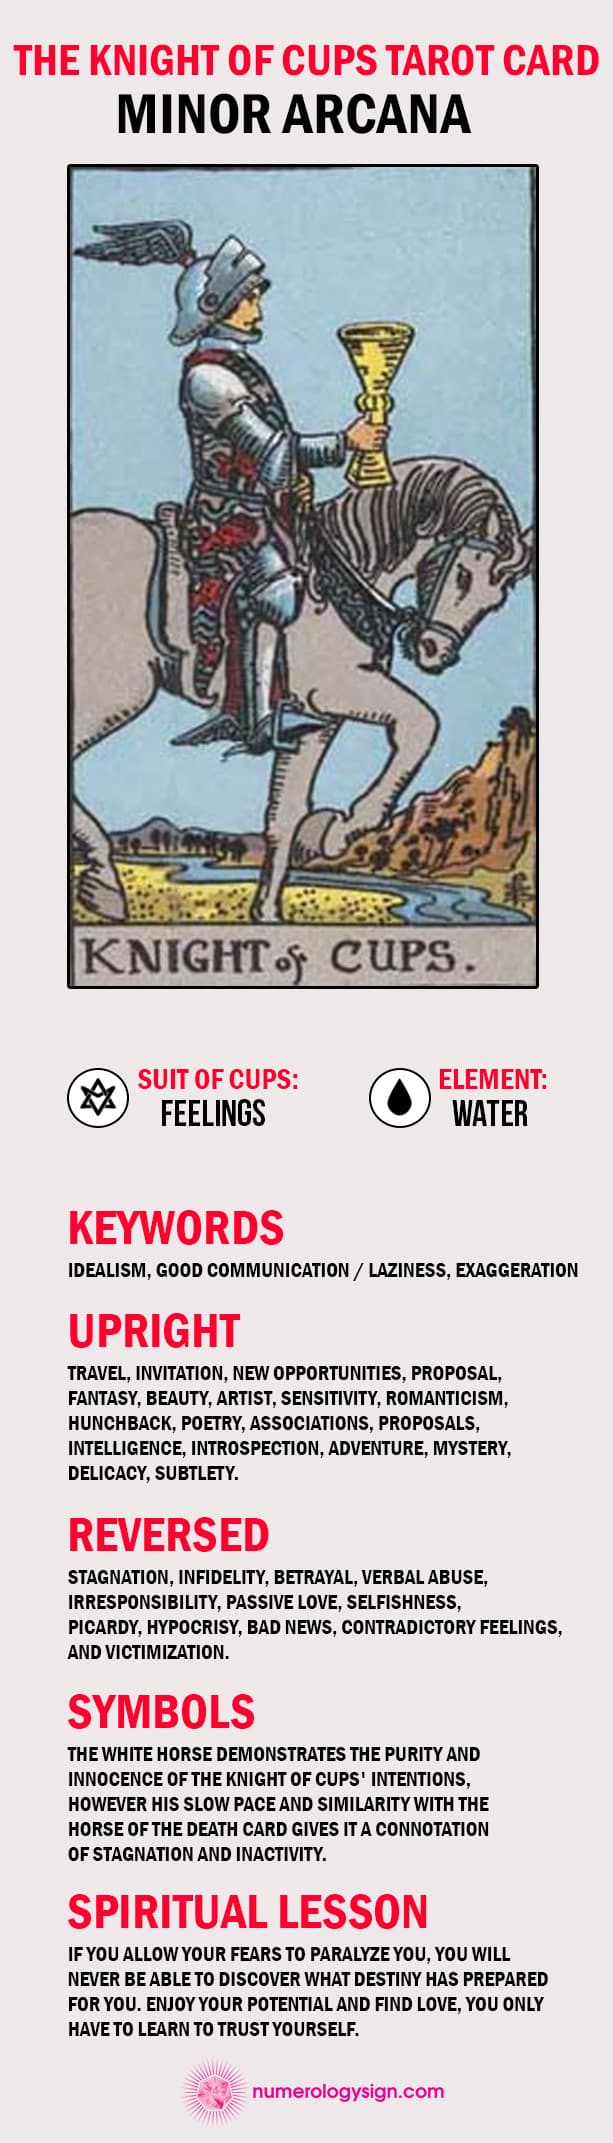 The Knight of Cups Tarot Card Meaning Infographic - Minor Arcana